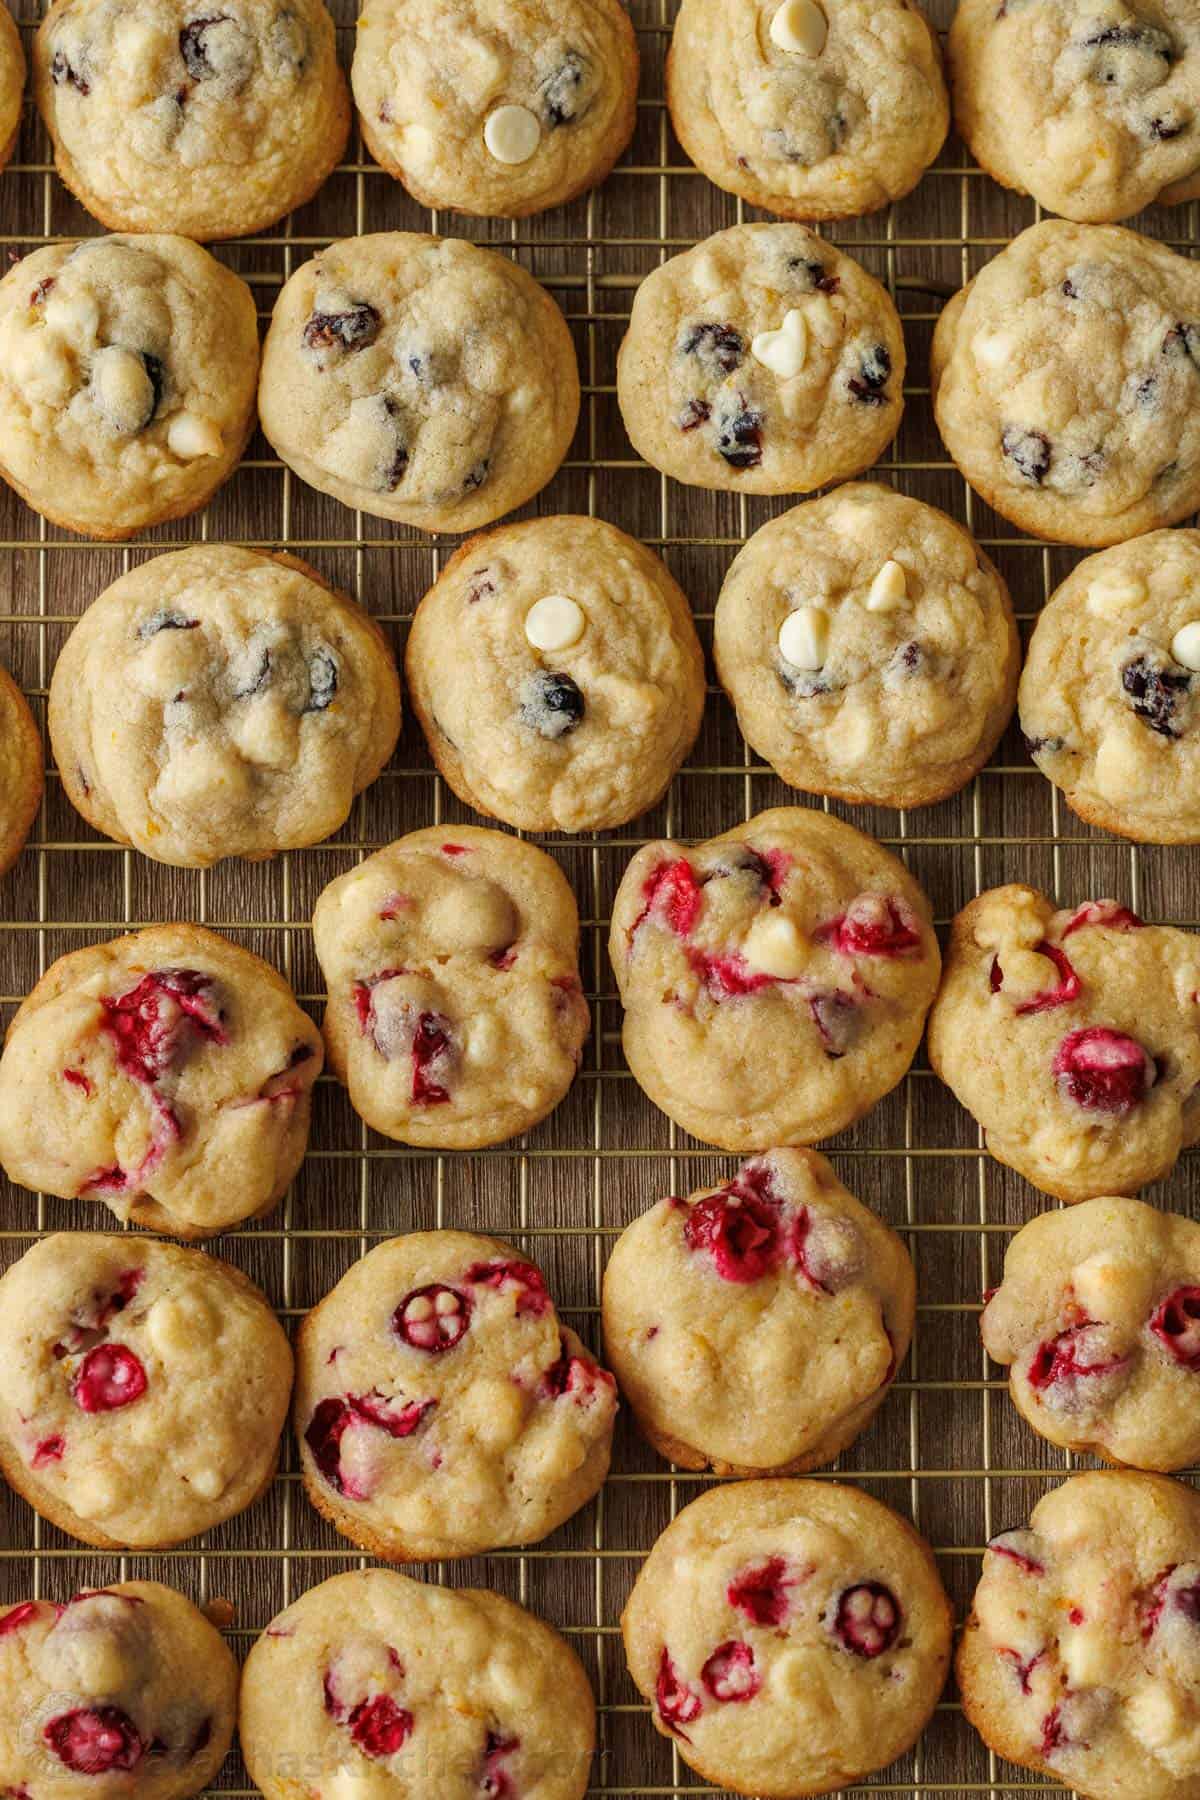 Cranberry white chocolate chip cookies baked and ready to serve